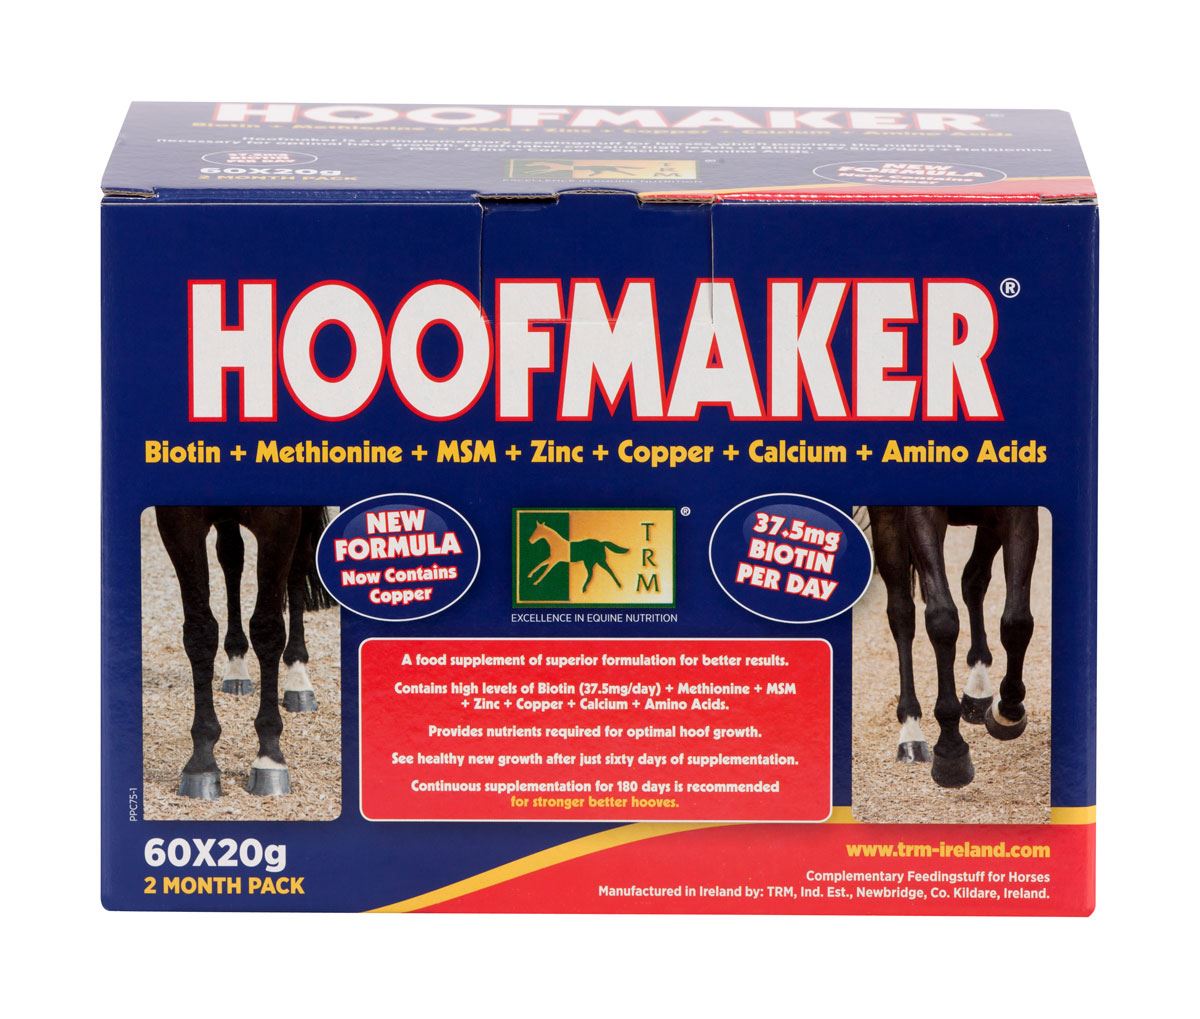 Thoroughbred Remedies Hoofmaker - Just Horse Riders